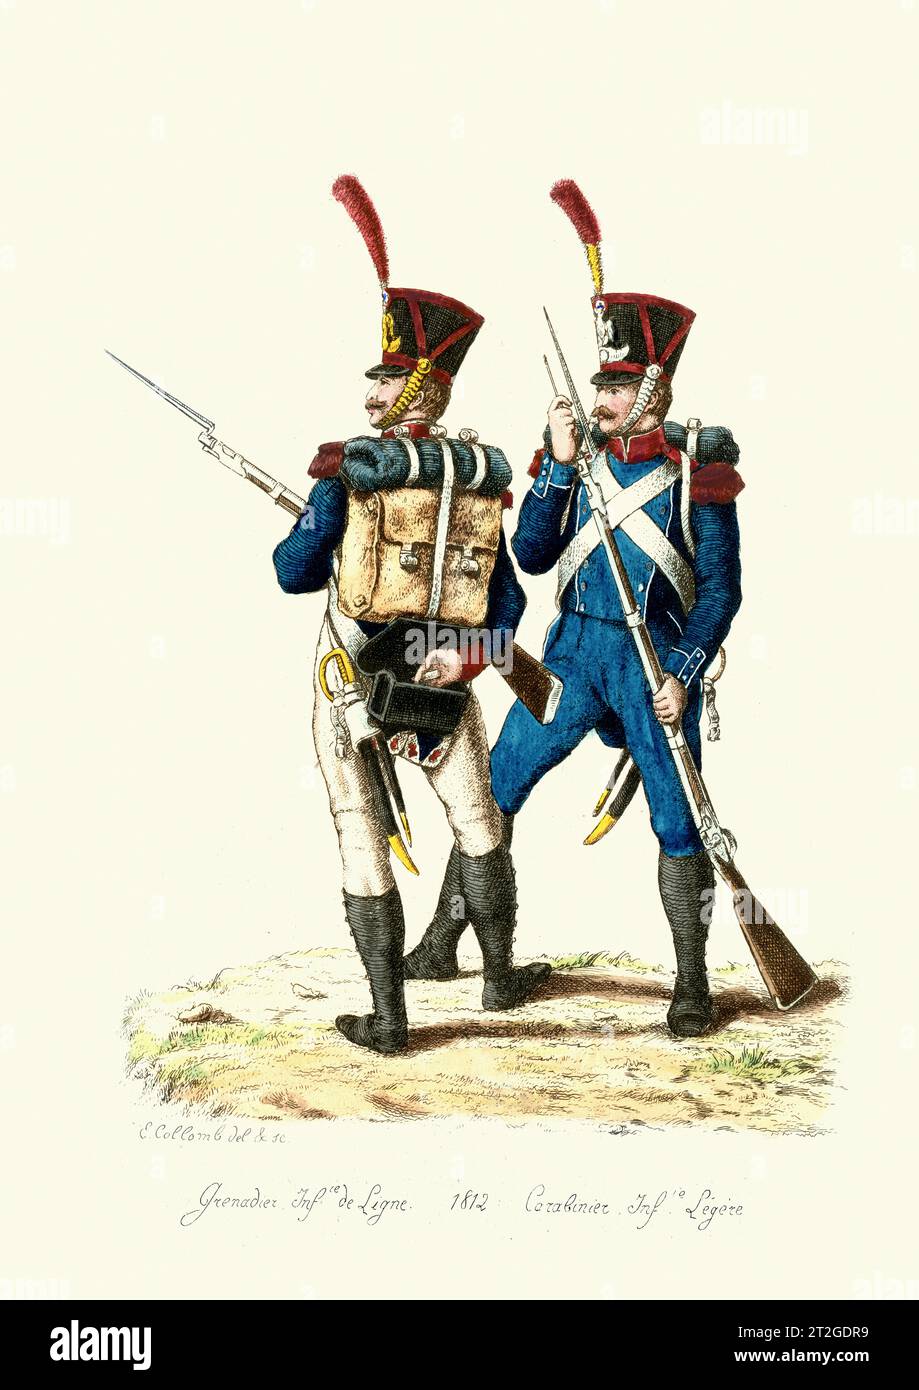 French Military Uniforms, Napoleonic Wars, History, Infantry soliders, Grenadier, Carabinier, 1809 Stock Photo